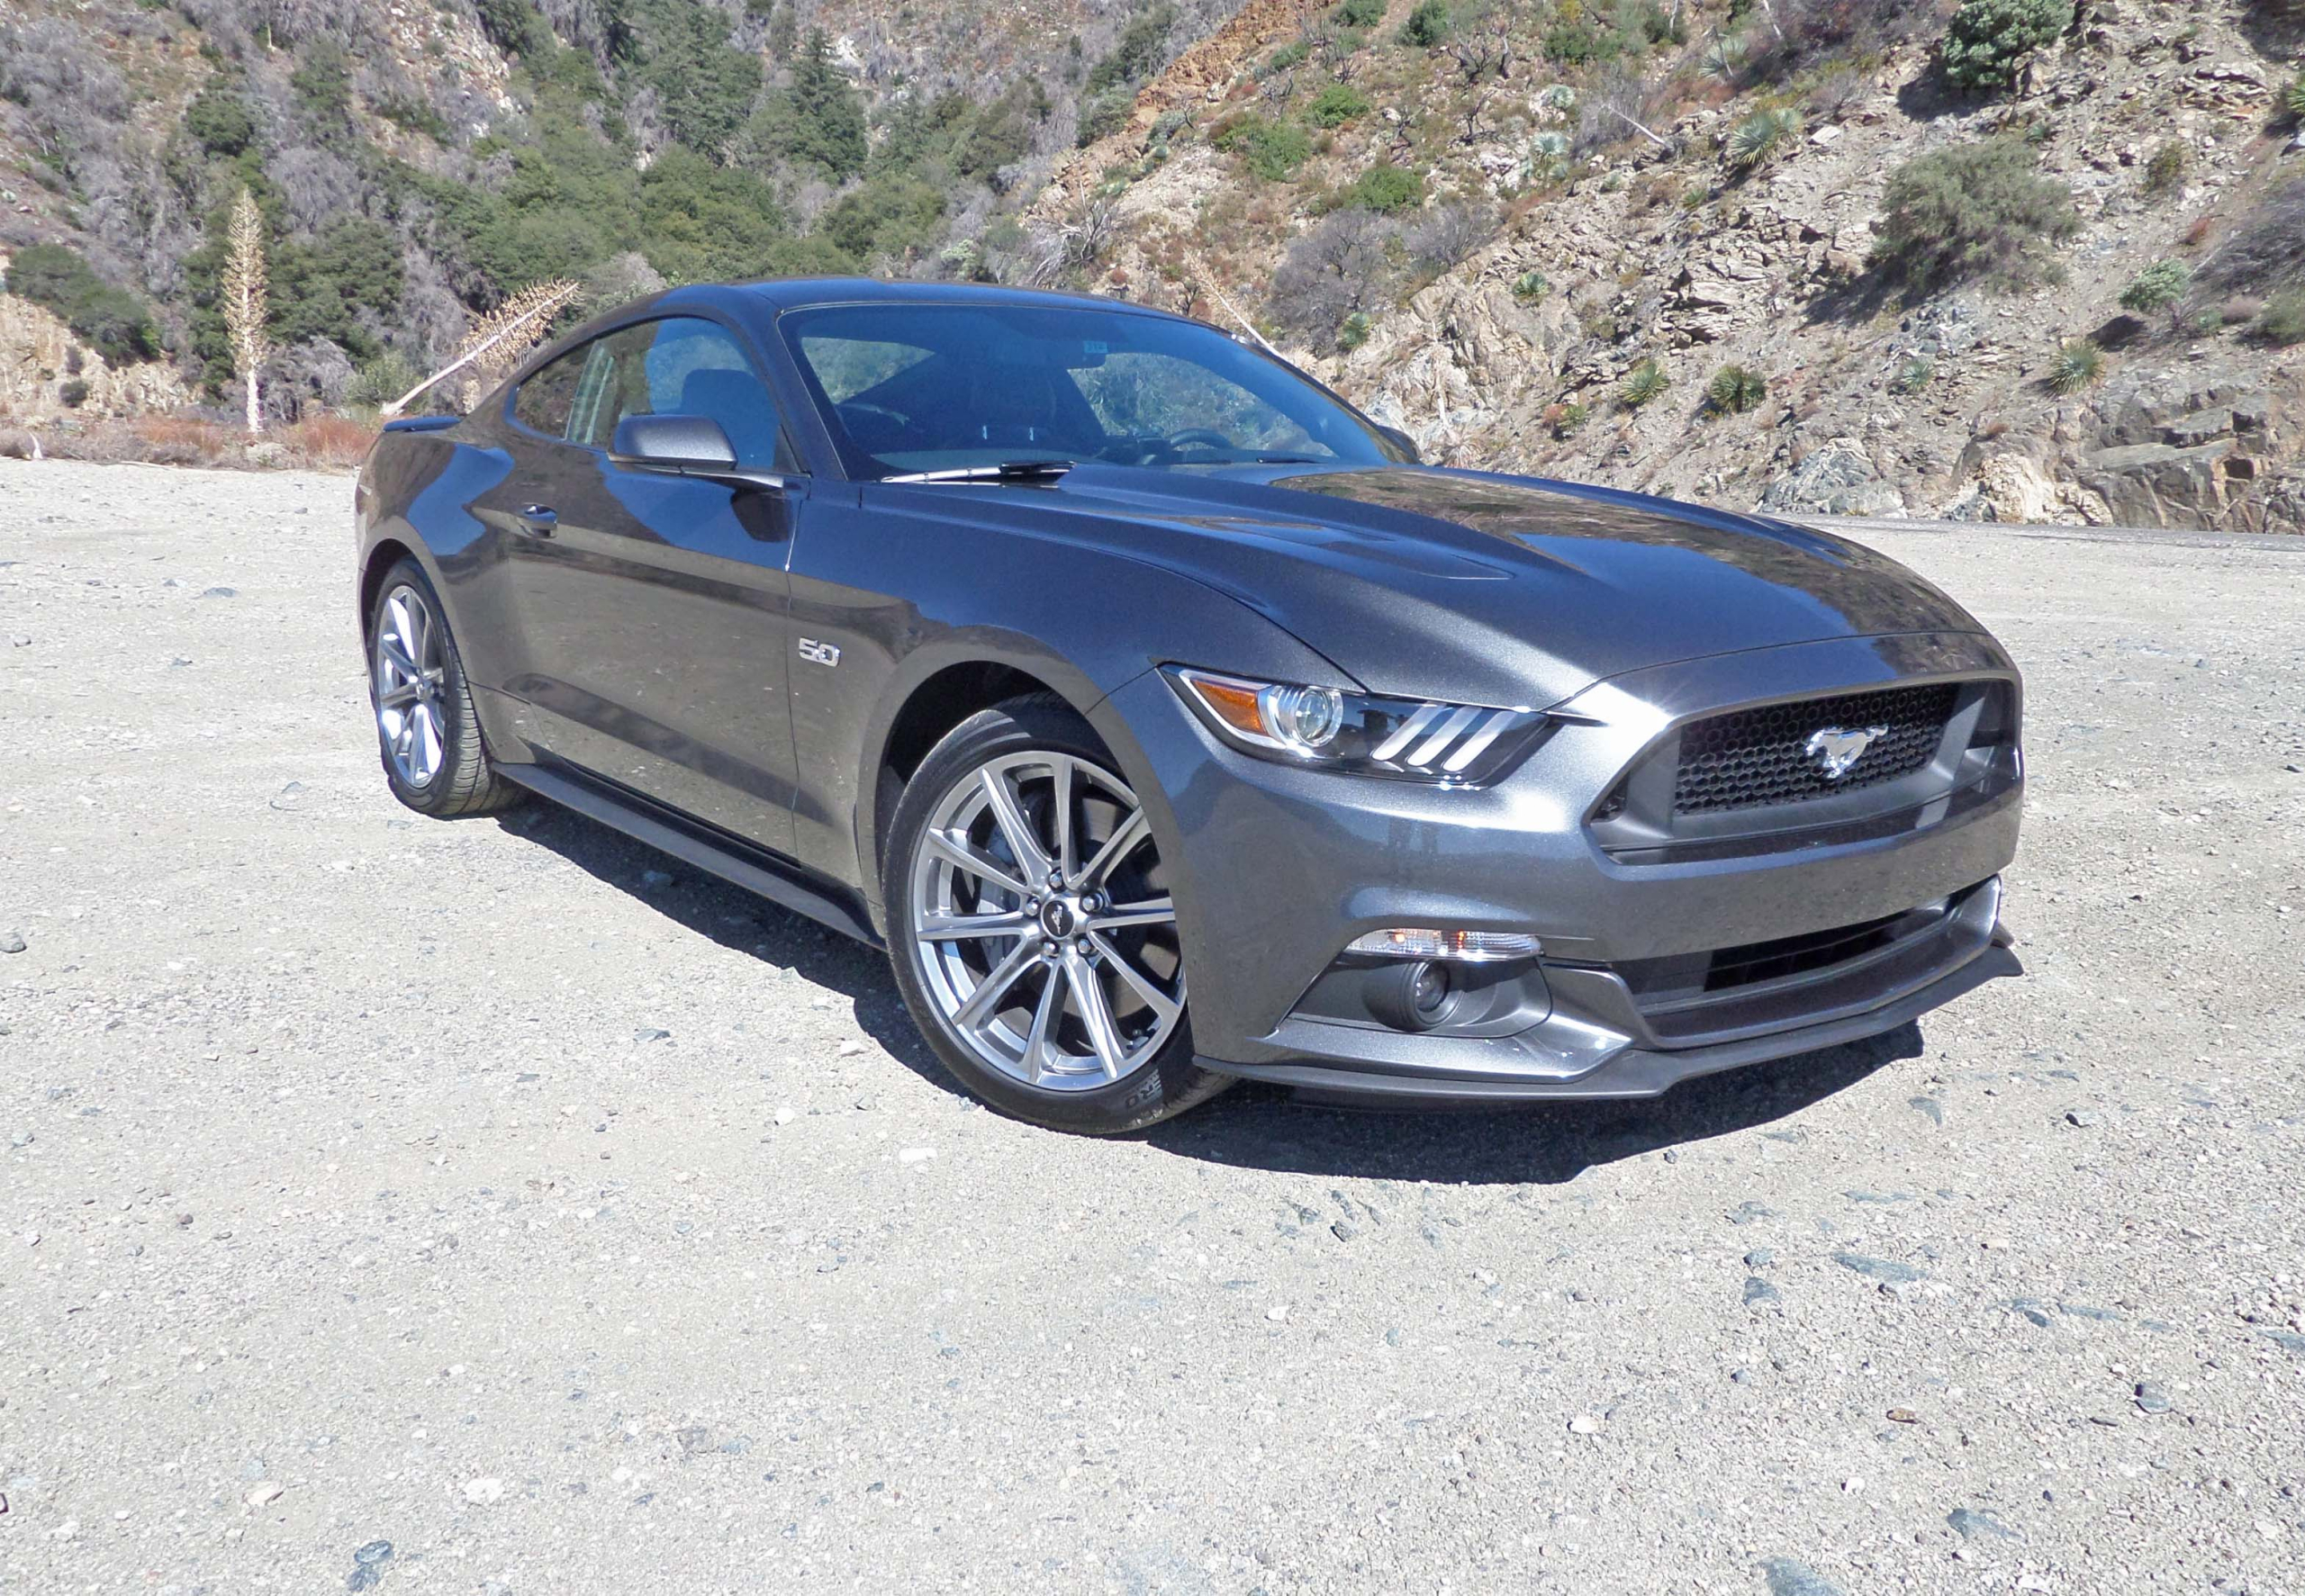 2015 Ford Mustang Coupe Test Drive